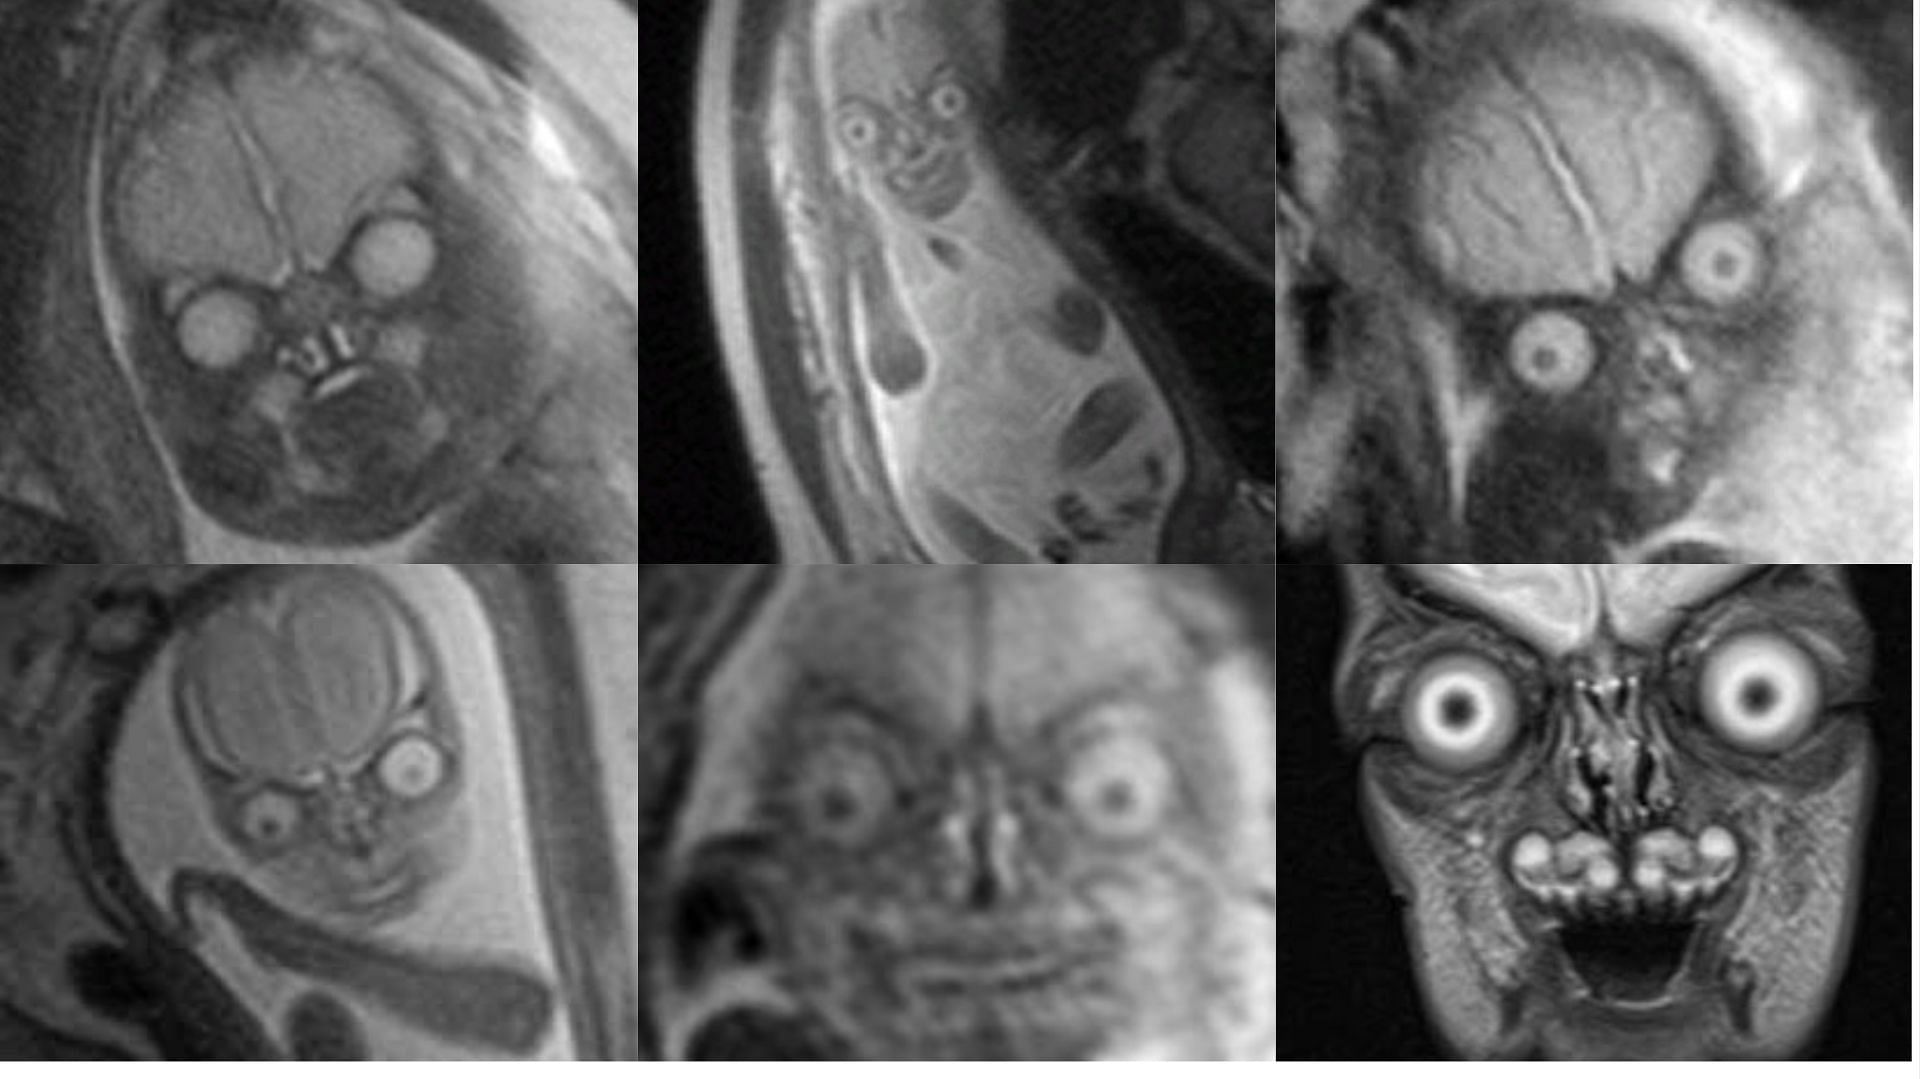 MRI scans of fetuses depict an unexpectedly creepy &#039;demonic&#039; appearance (Images via Twitter/ZiziFothSi)